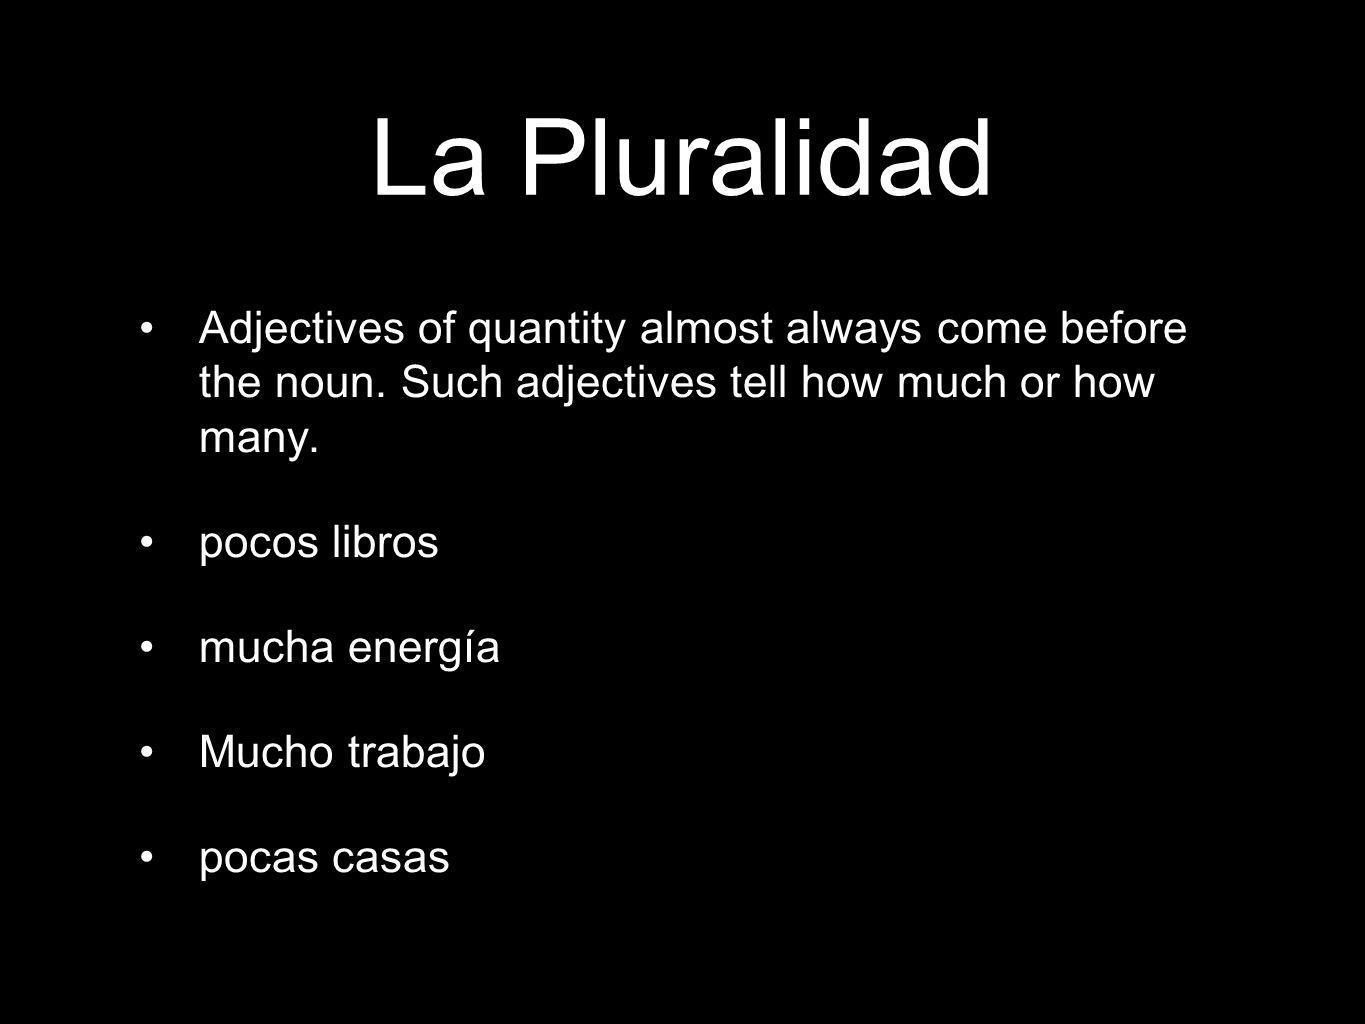 La Pluralidad Adjectives of quantity almost always come before the noun.